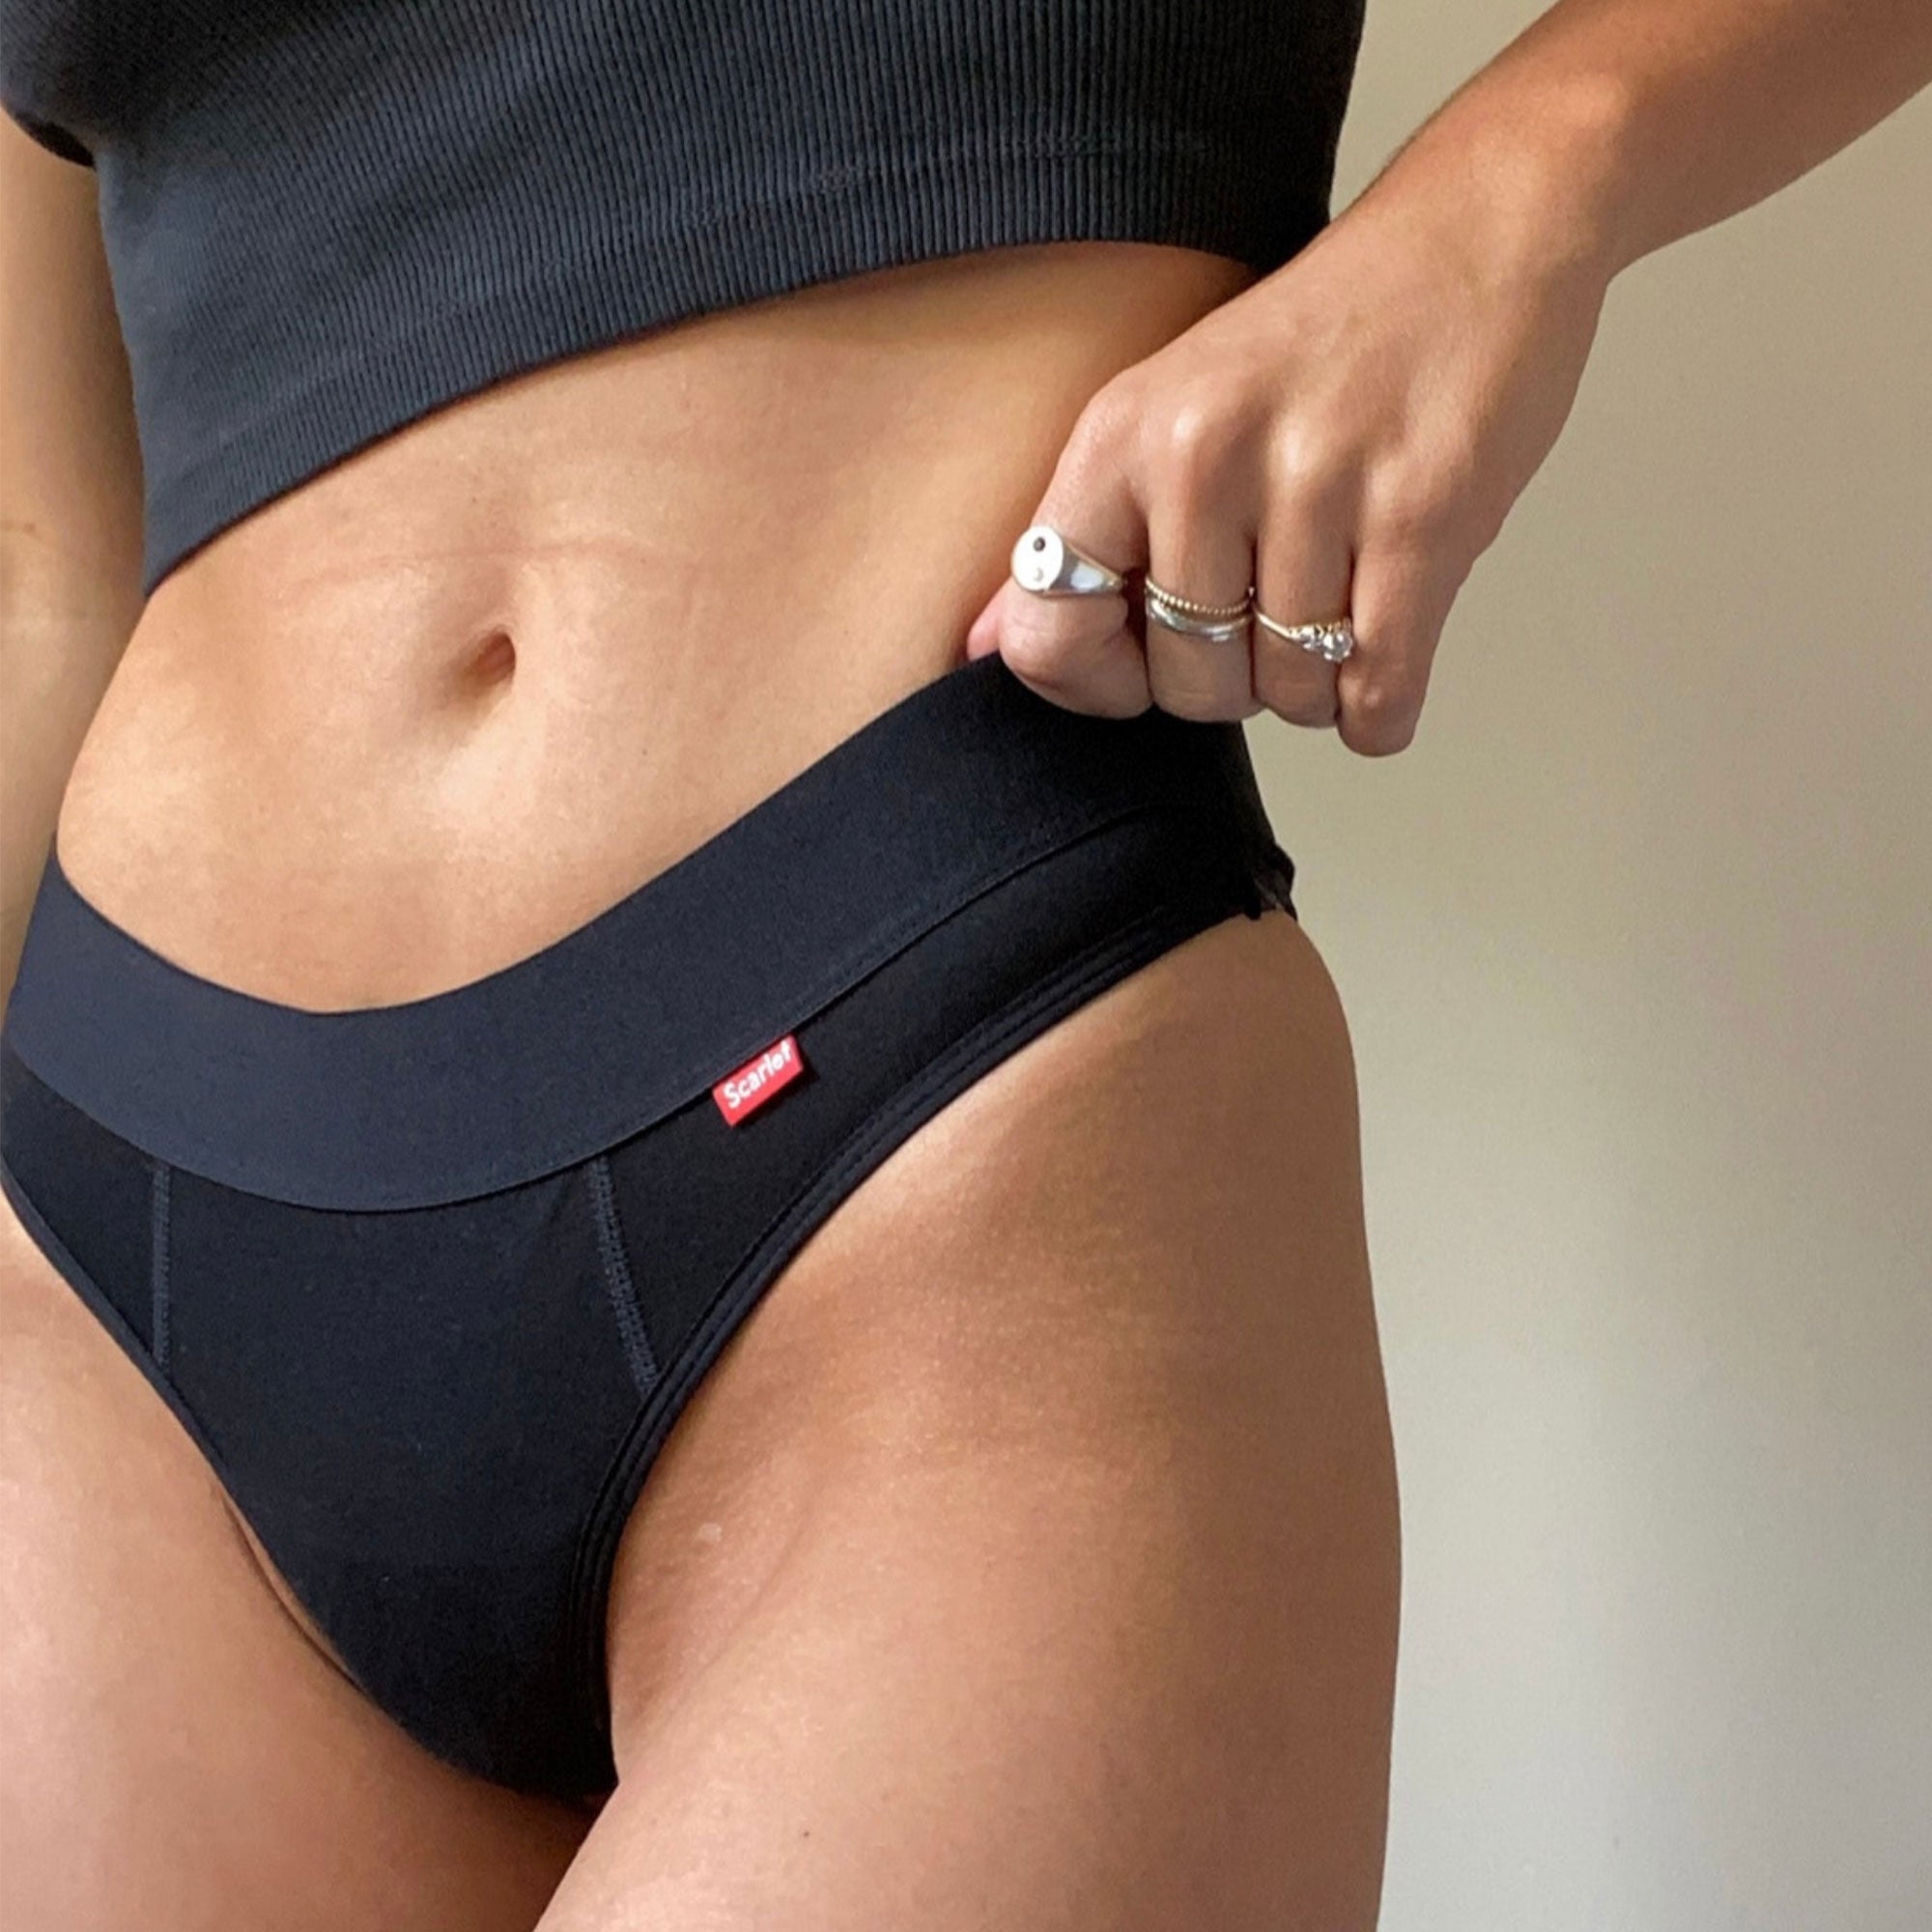 Review: I Tried Scarlet's Period Underwear For A Week